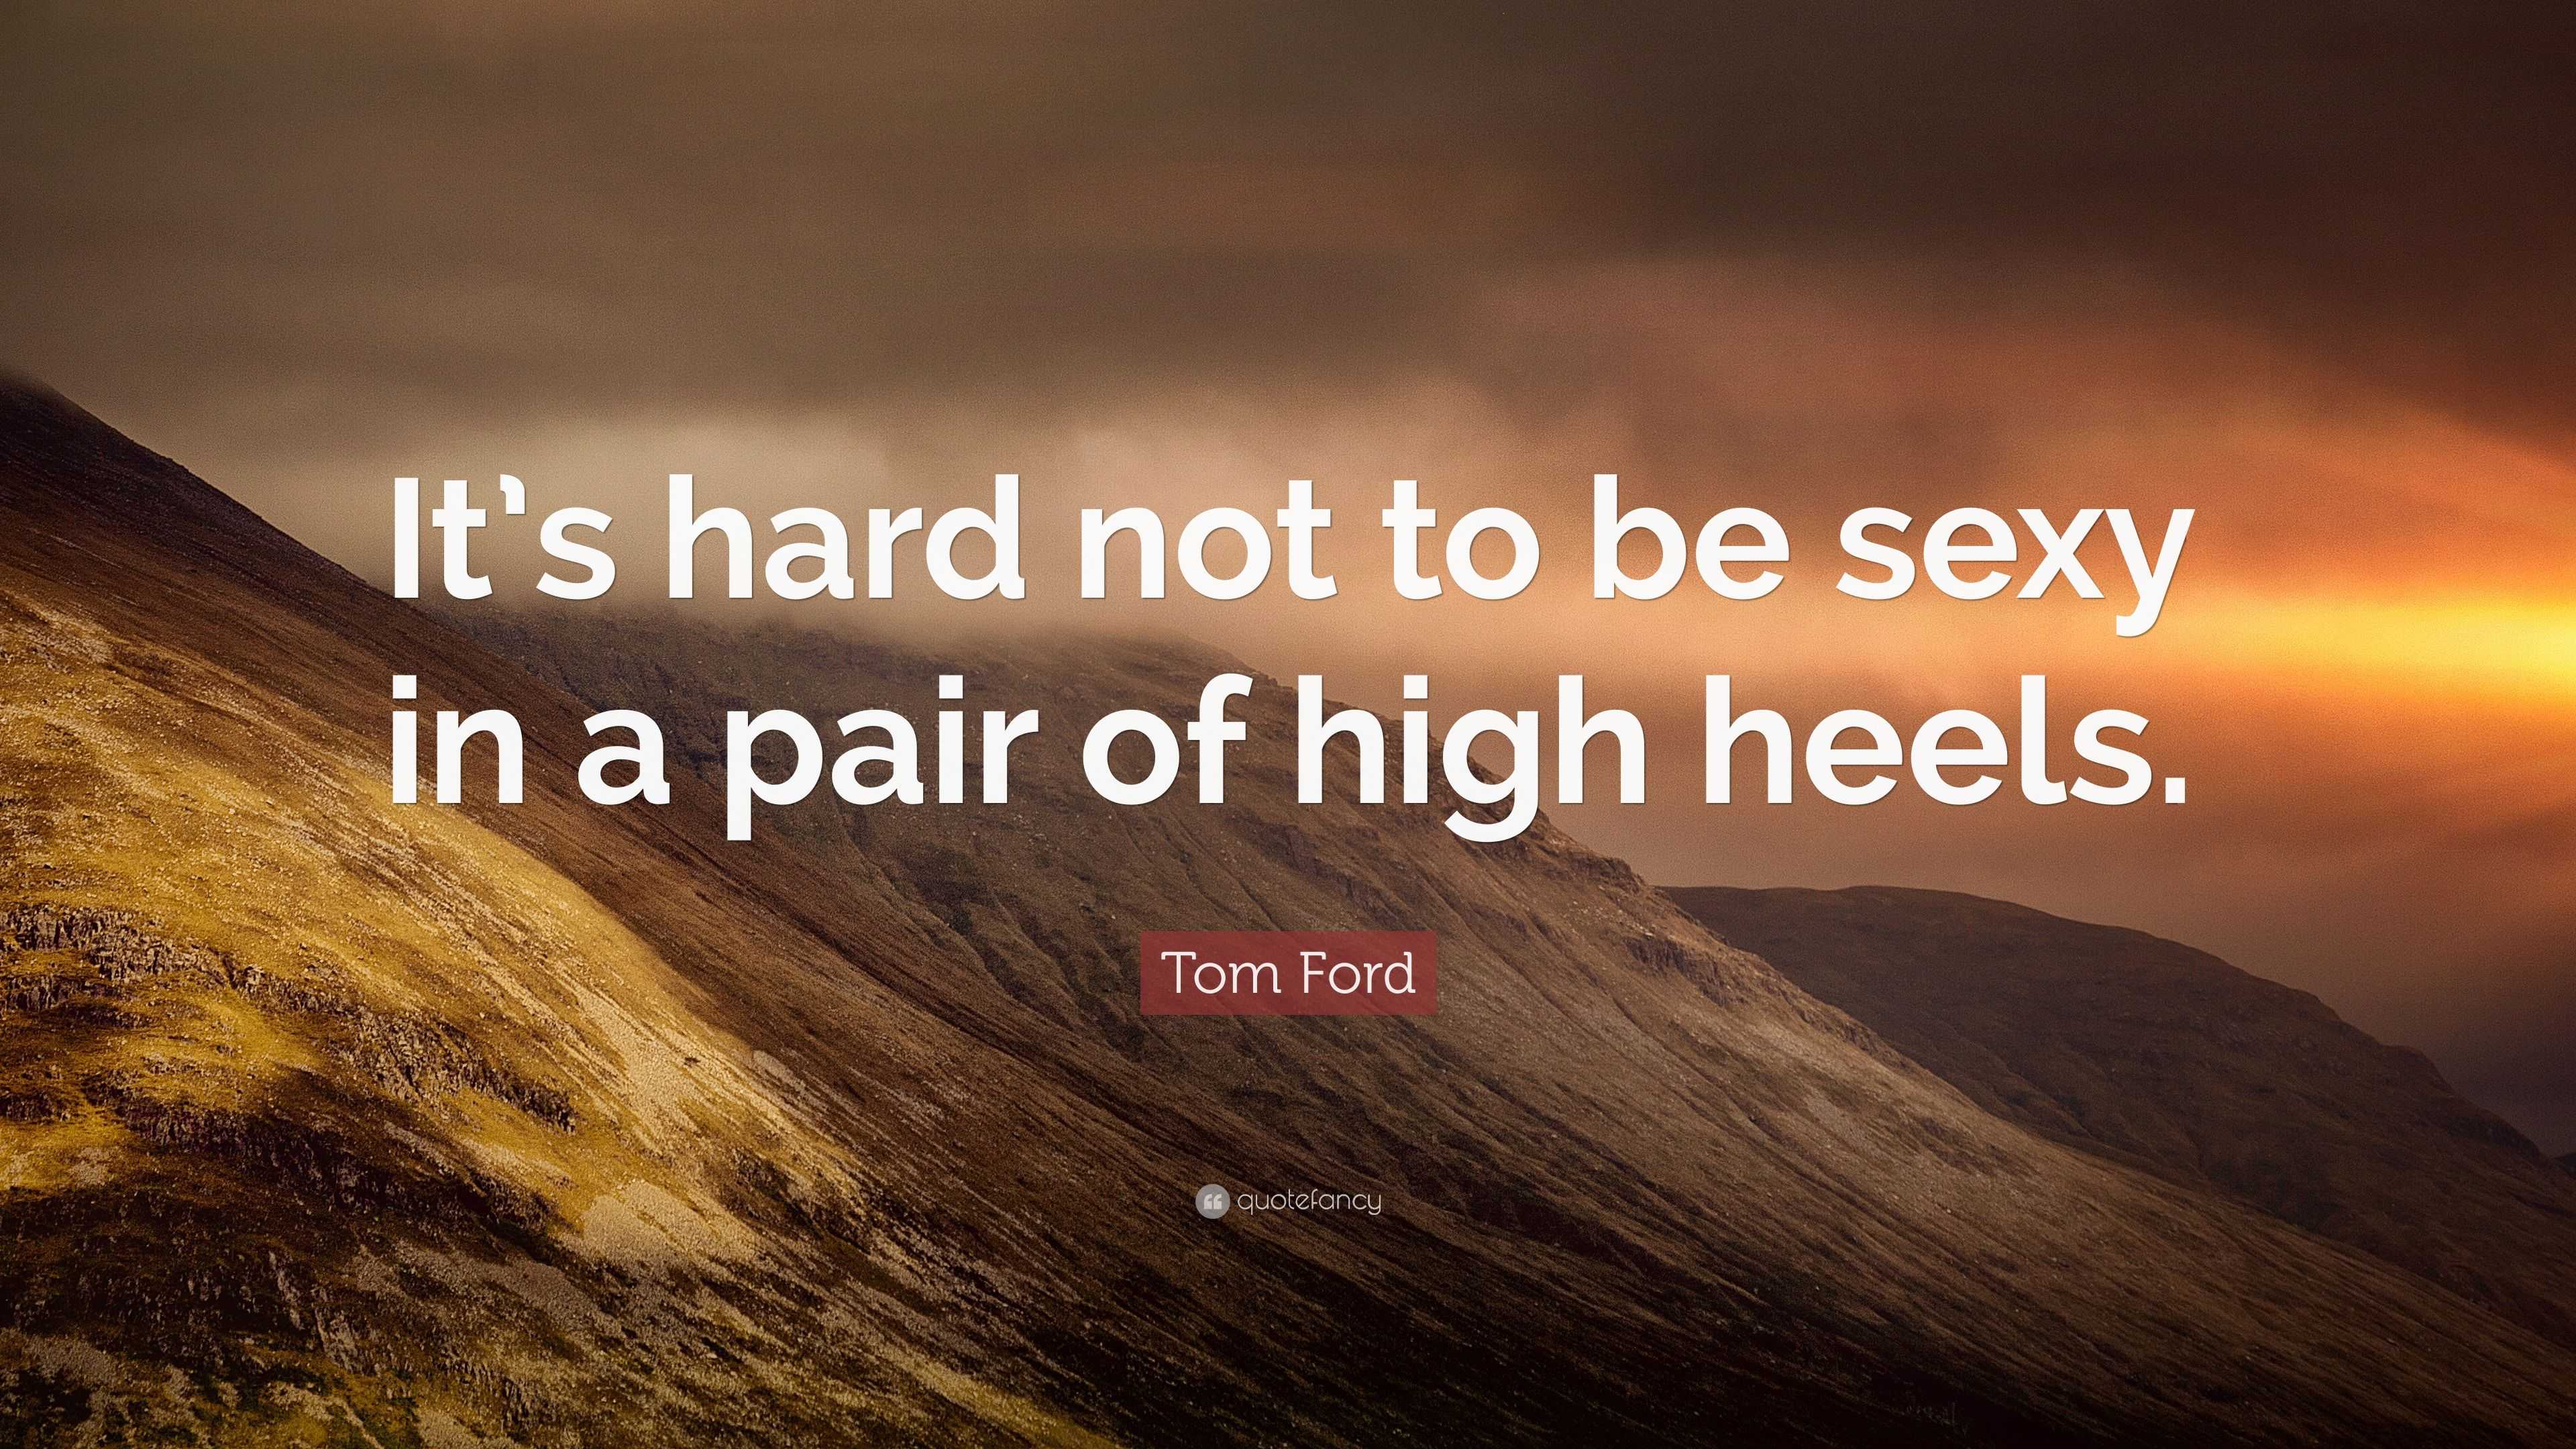 Tom Ford Quote: “It's hard not to be sexy in a pair of high heels.”